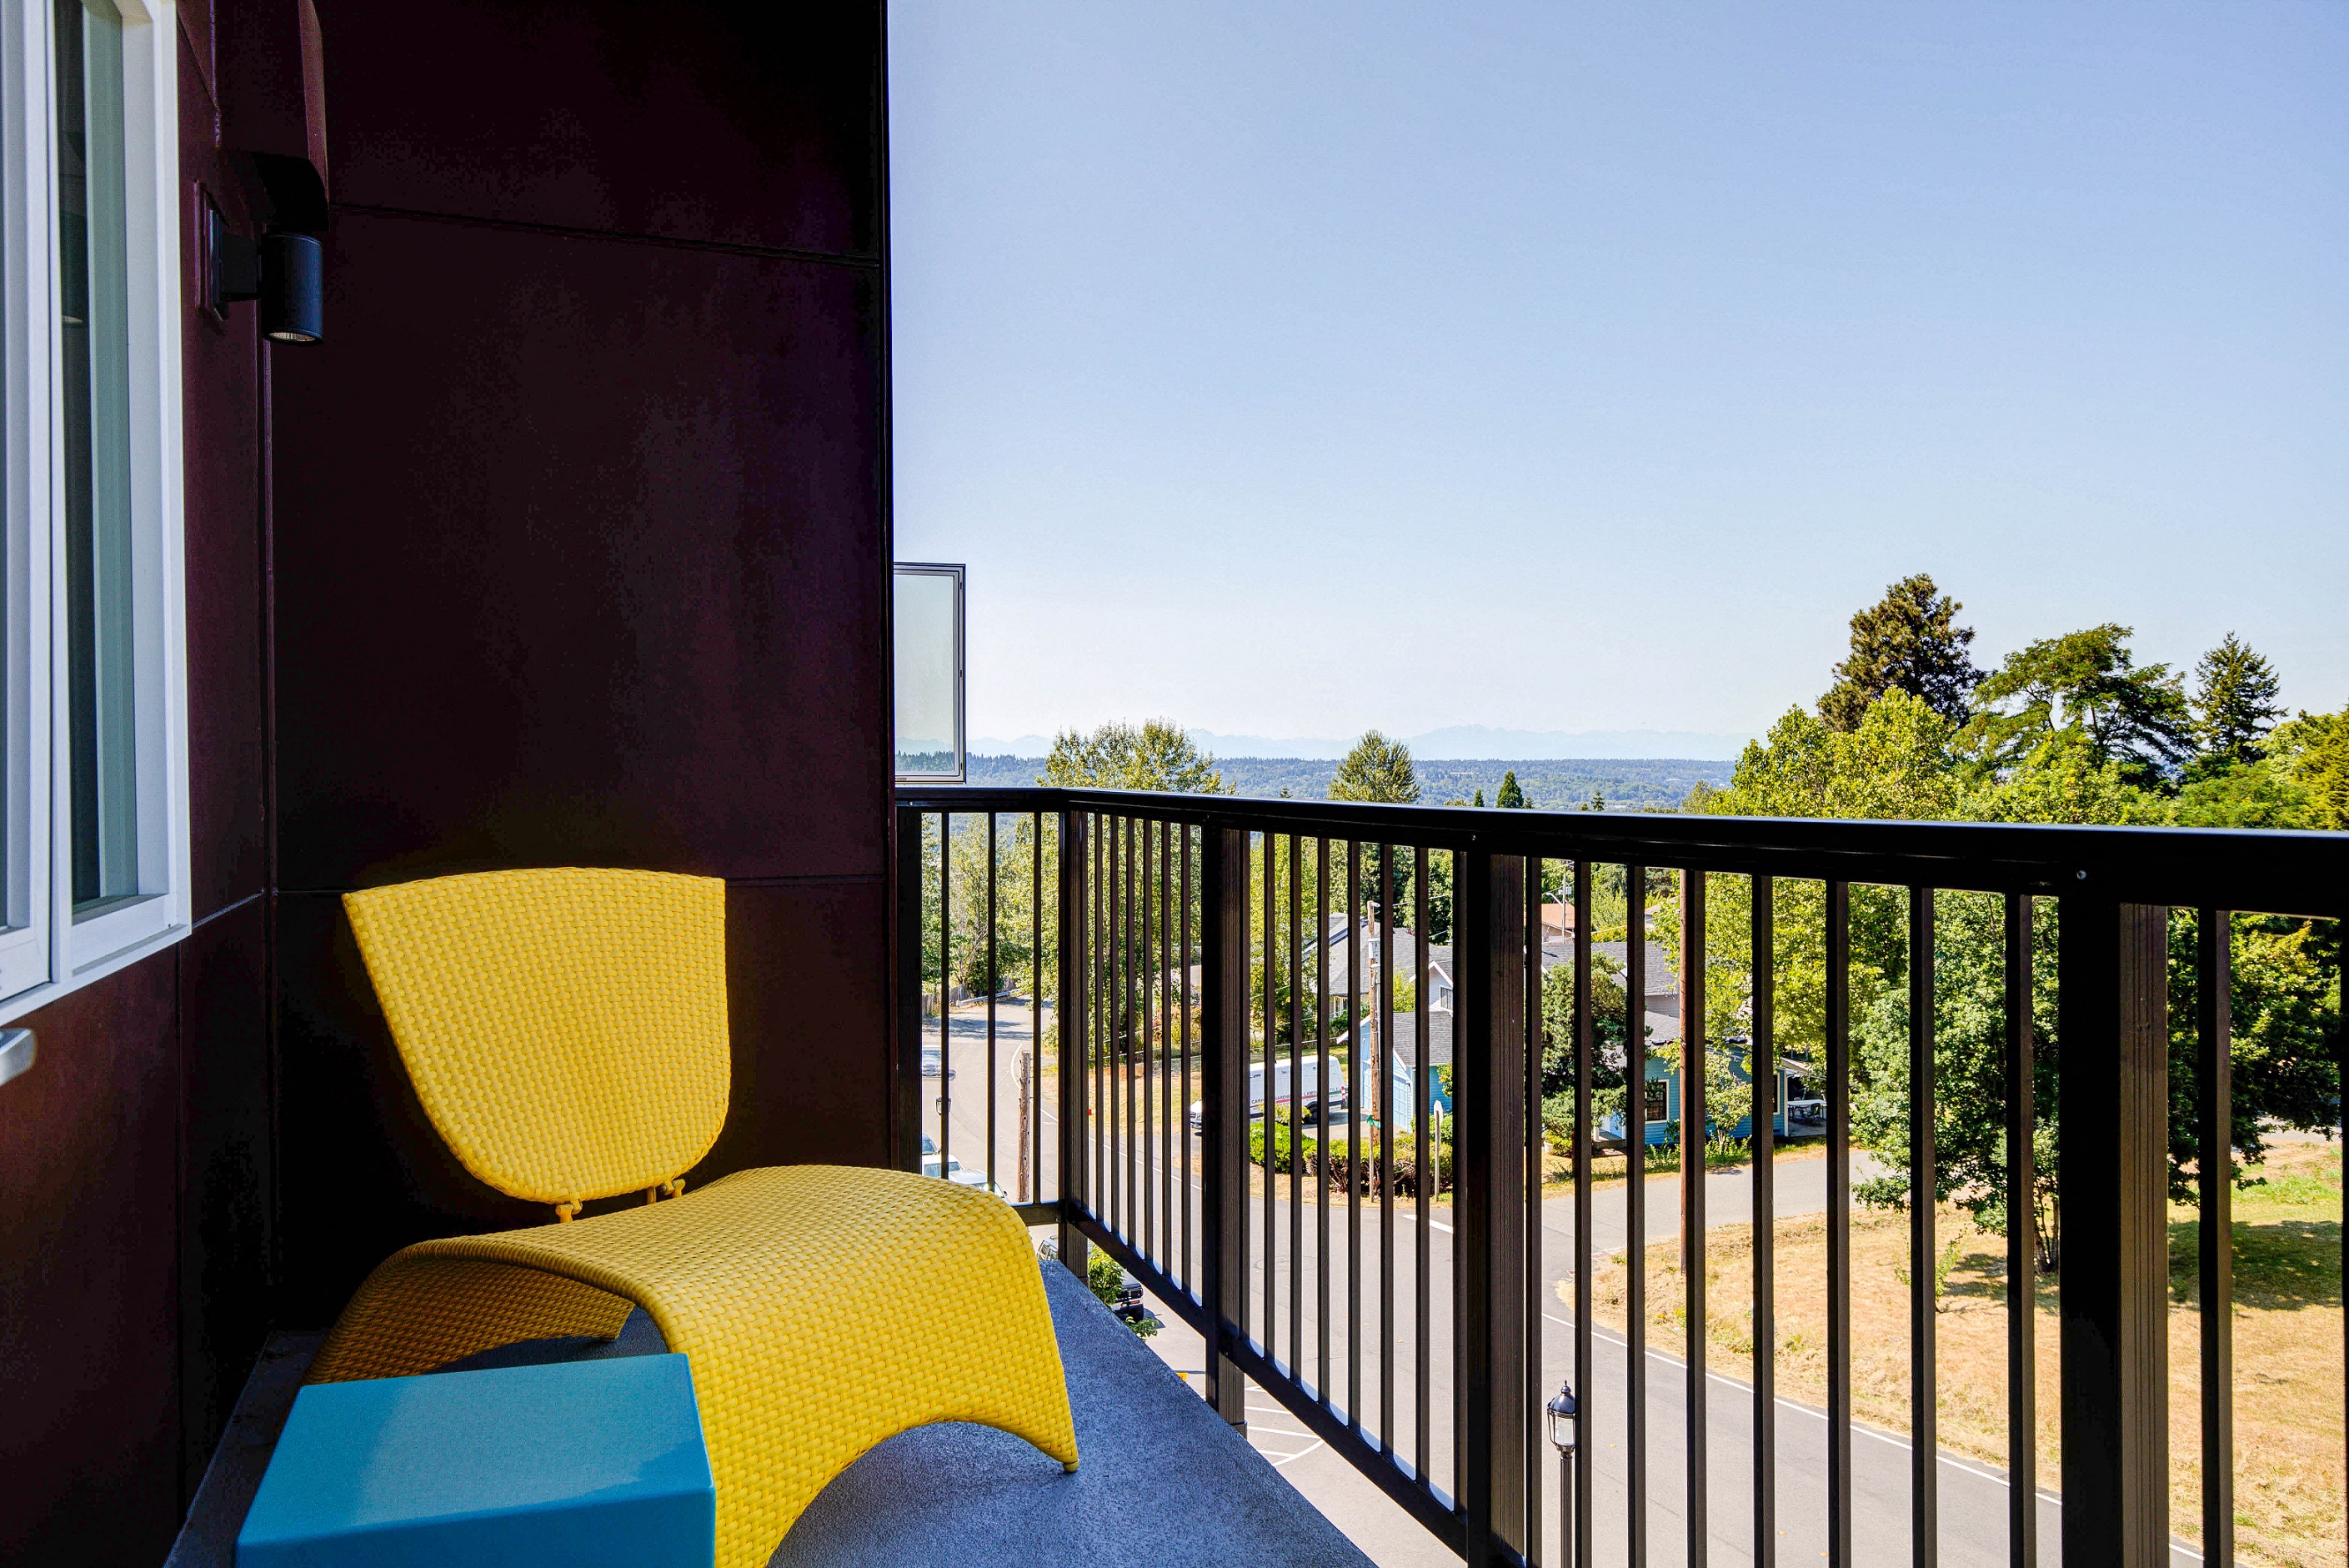 Private Patio Overlooking Parking Lot with Yellow Chair, Gate and Trees